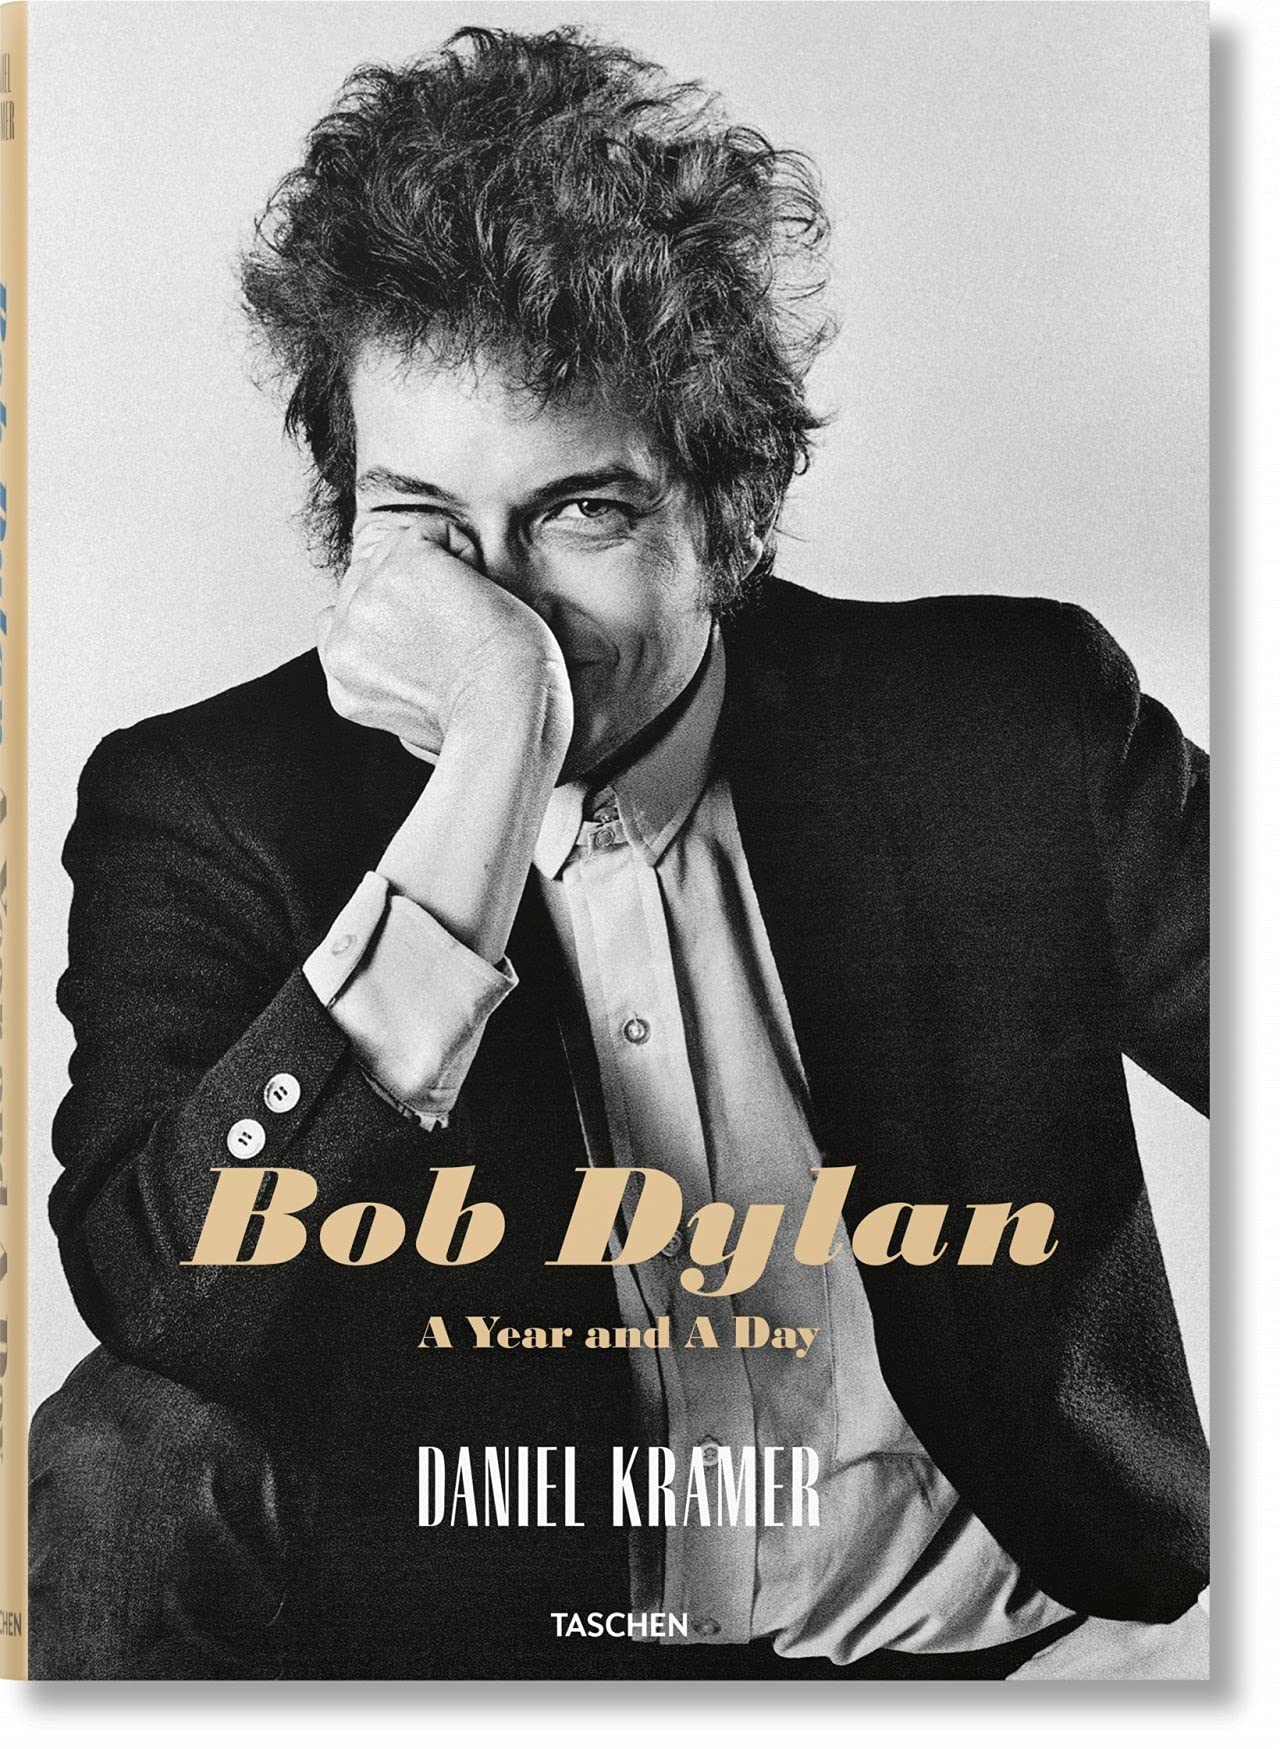 Bob Dylan: A Year and a Day images from the bible old testament